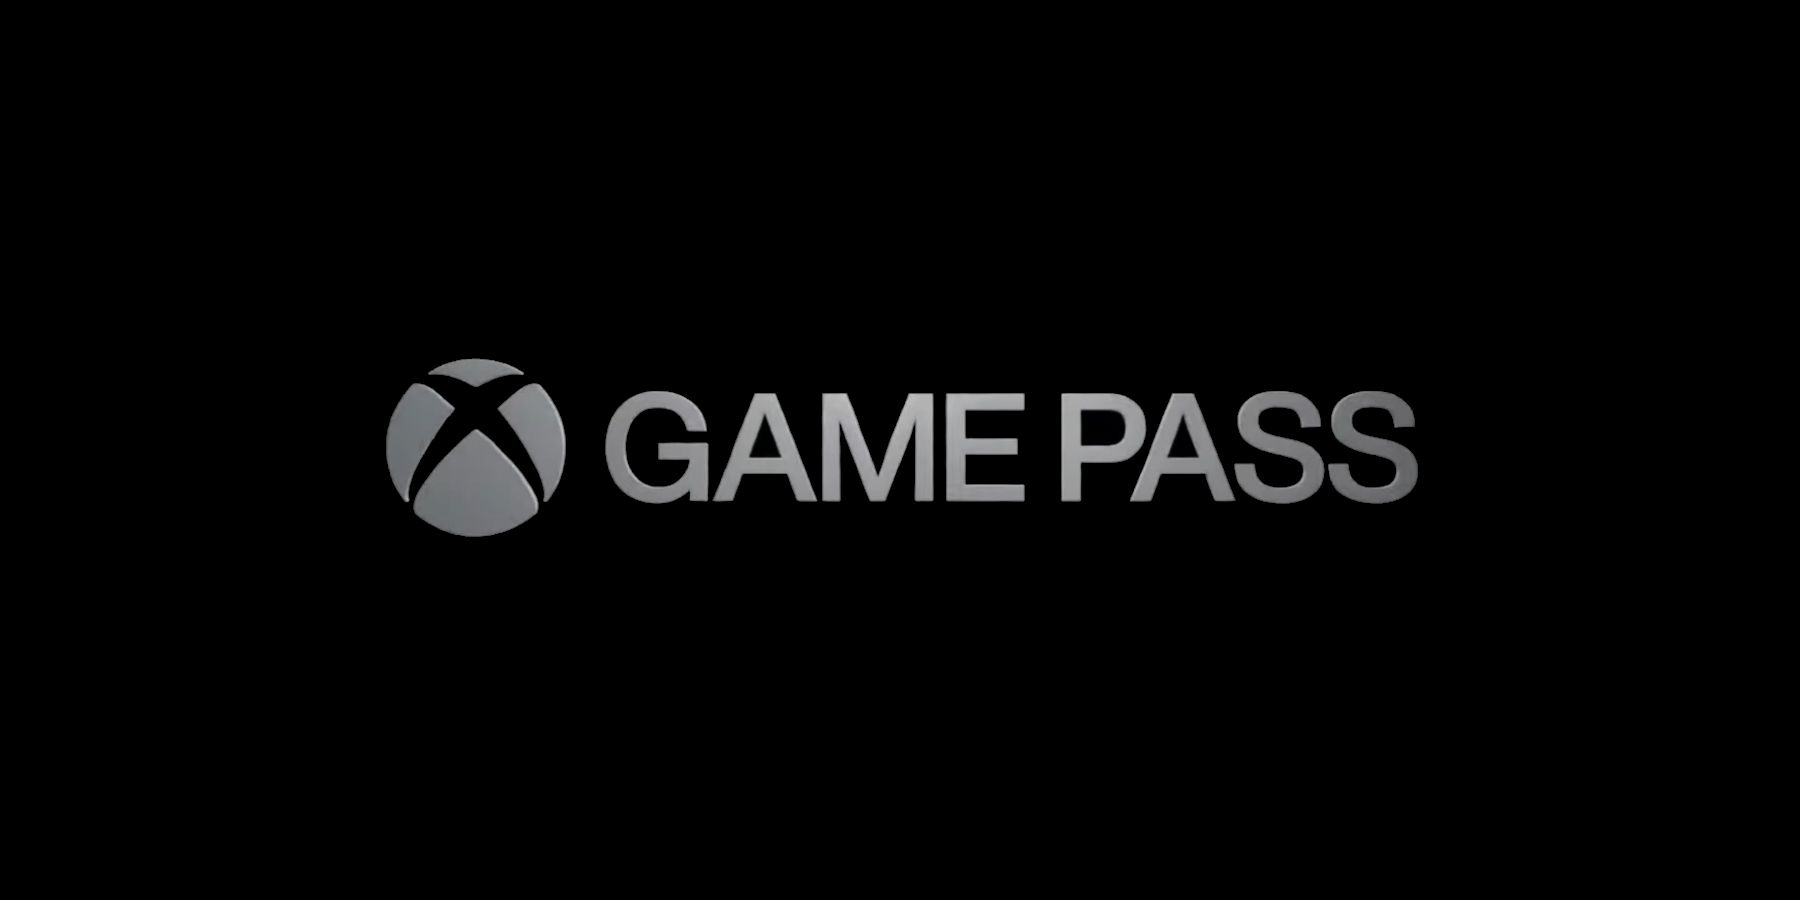 Back 4 Blood is coming to Xbox Game Pass on day one